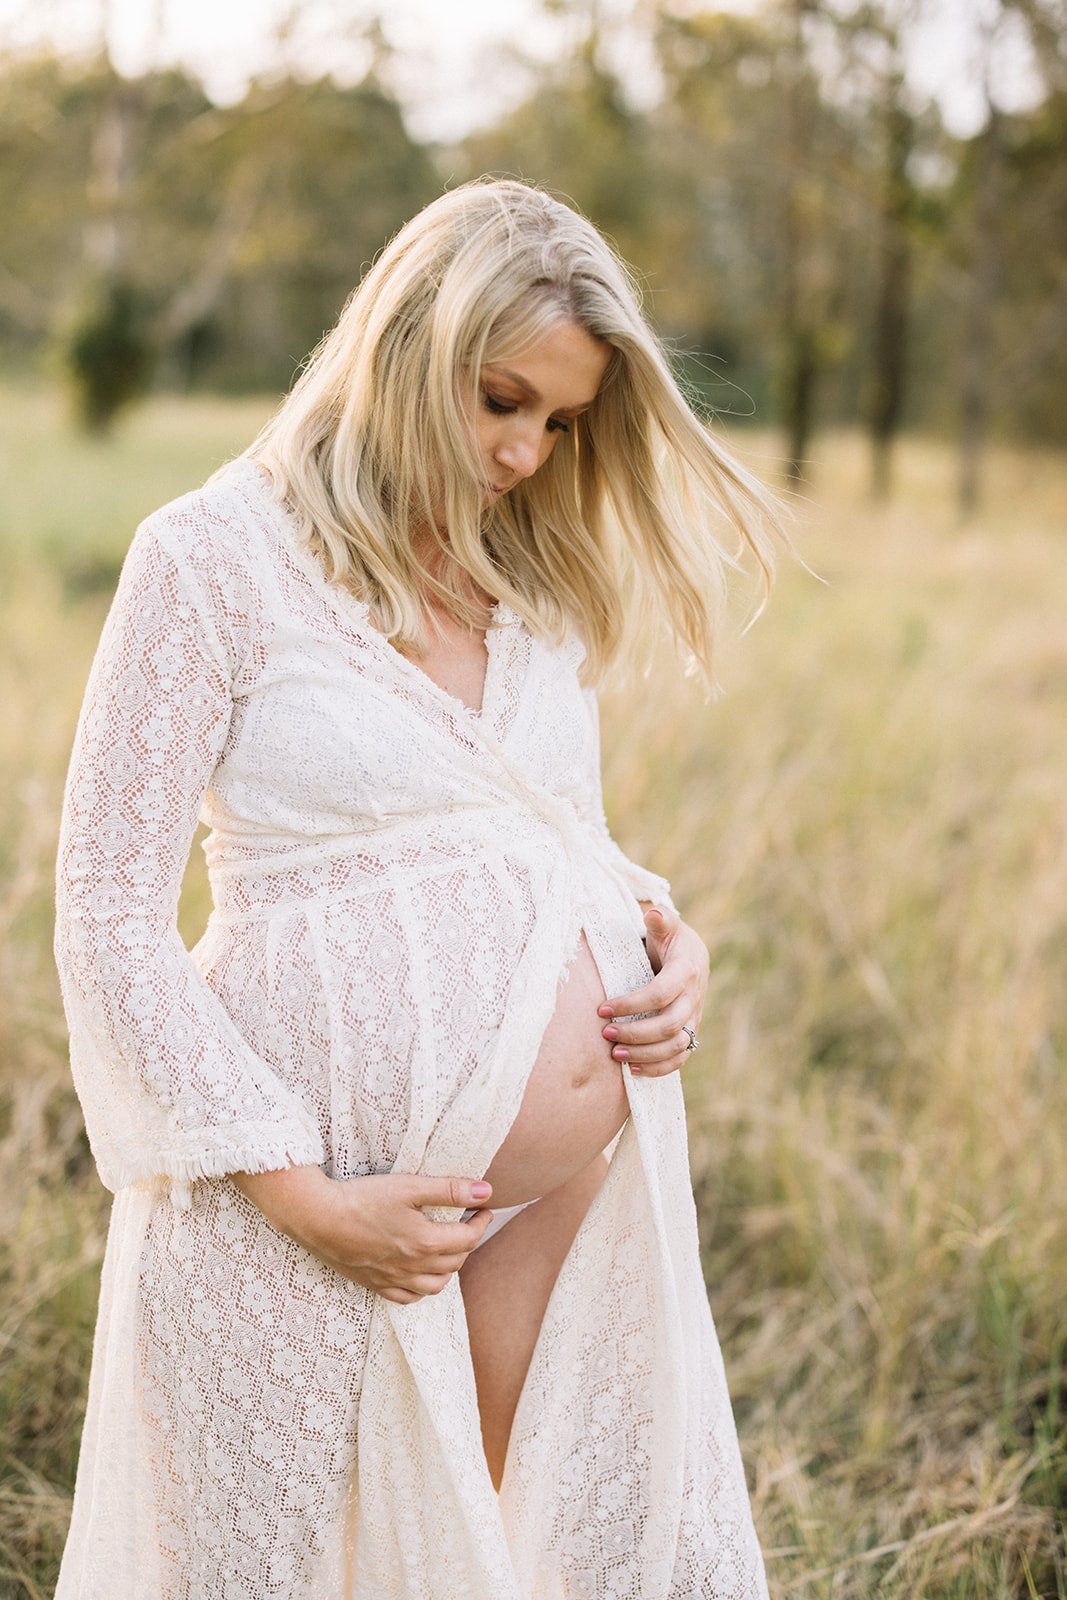 Mum to be wearing a beautiful maternity dress in a grassy field